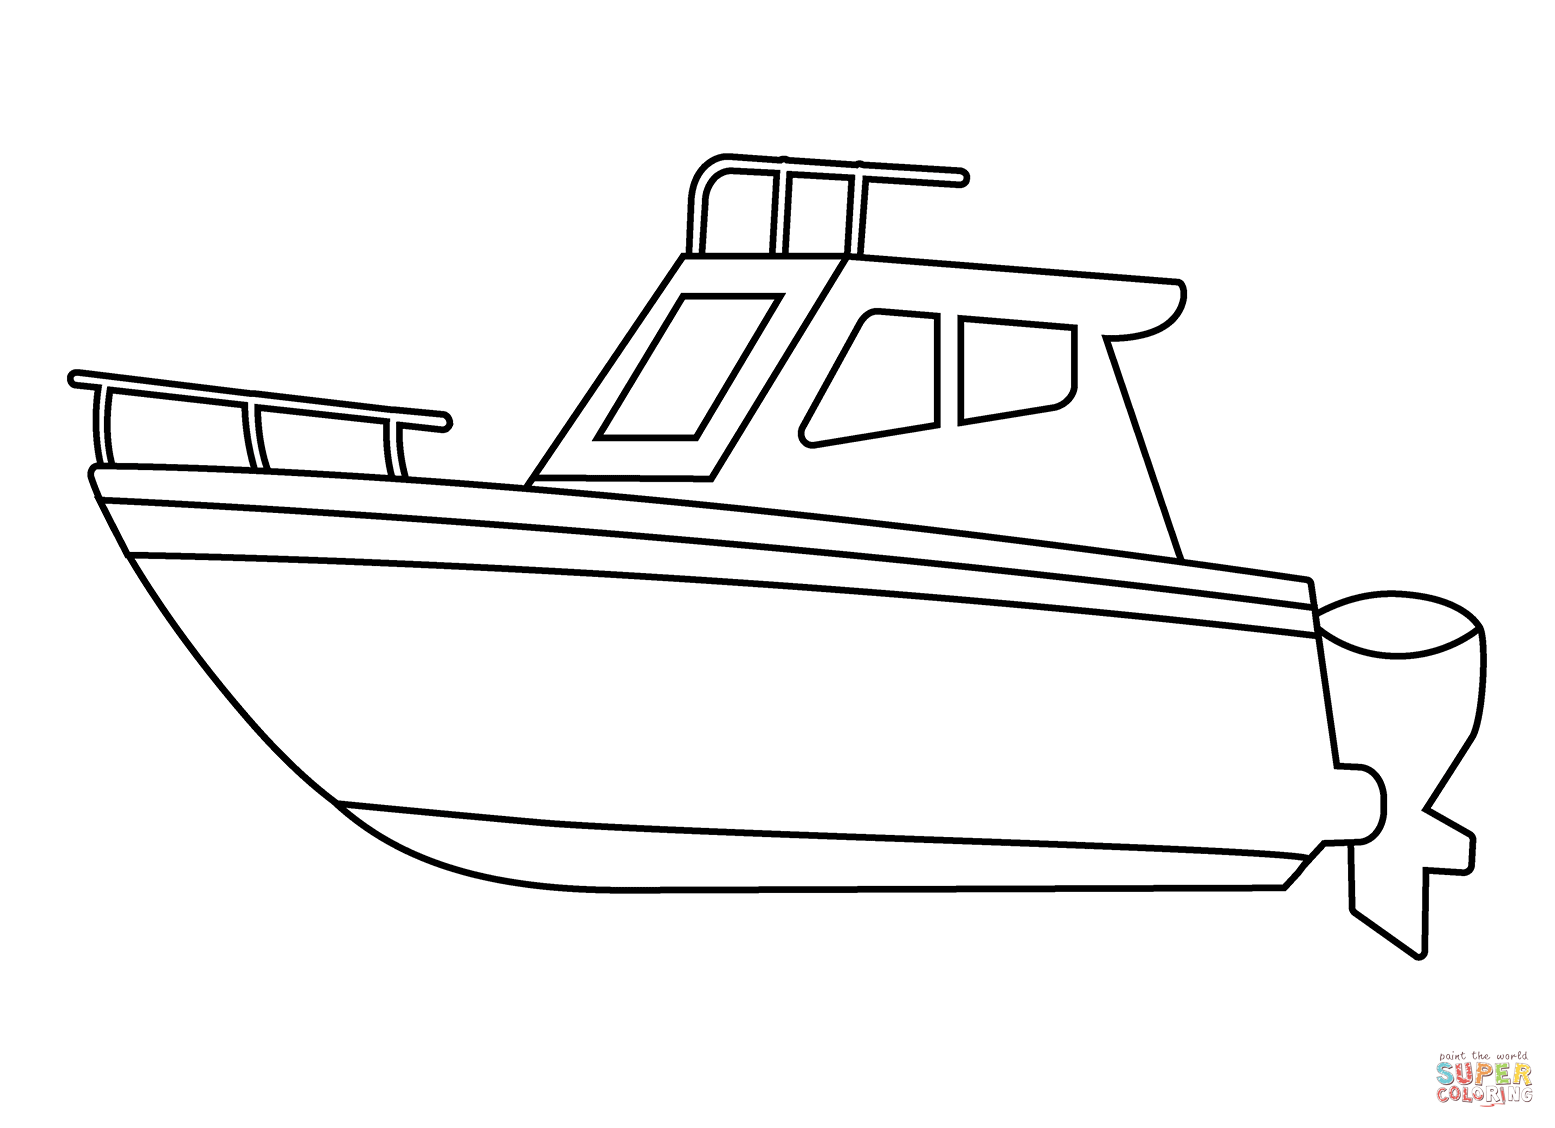 Motor boat emoji coloring page free printable coloring pages